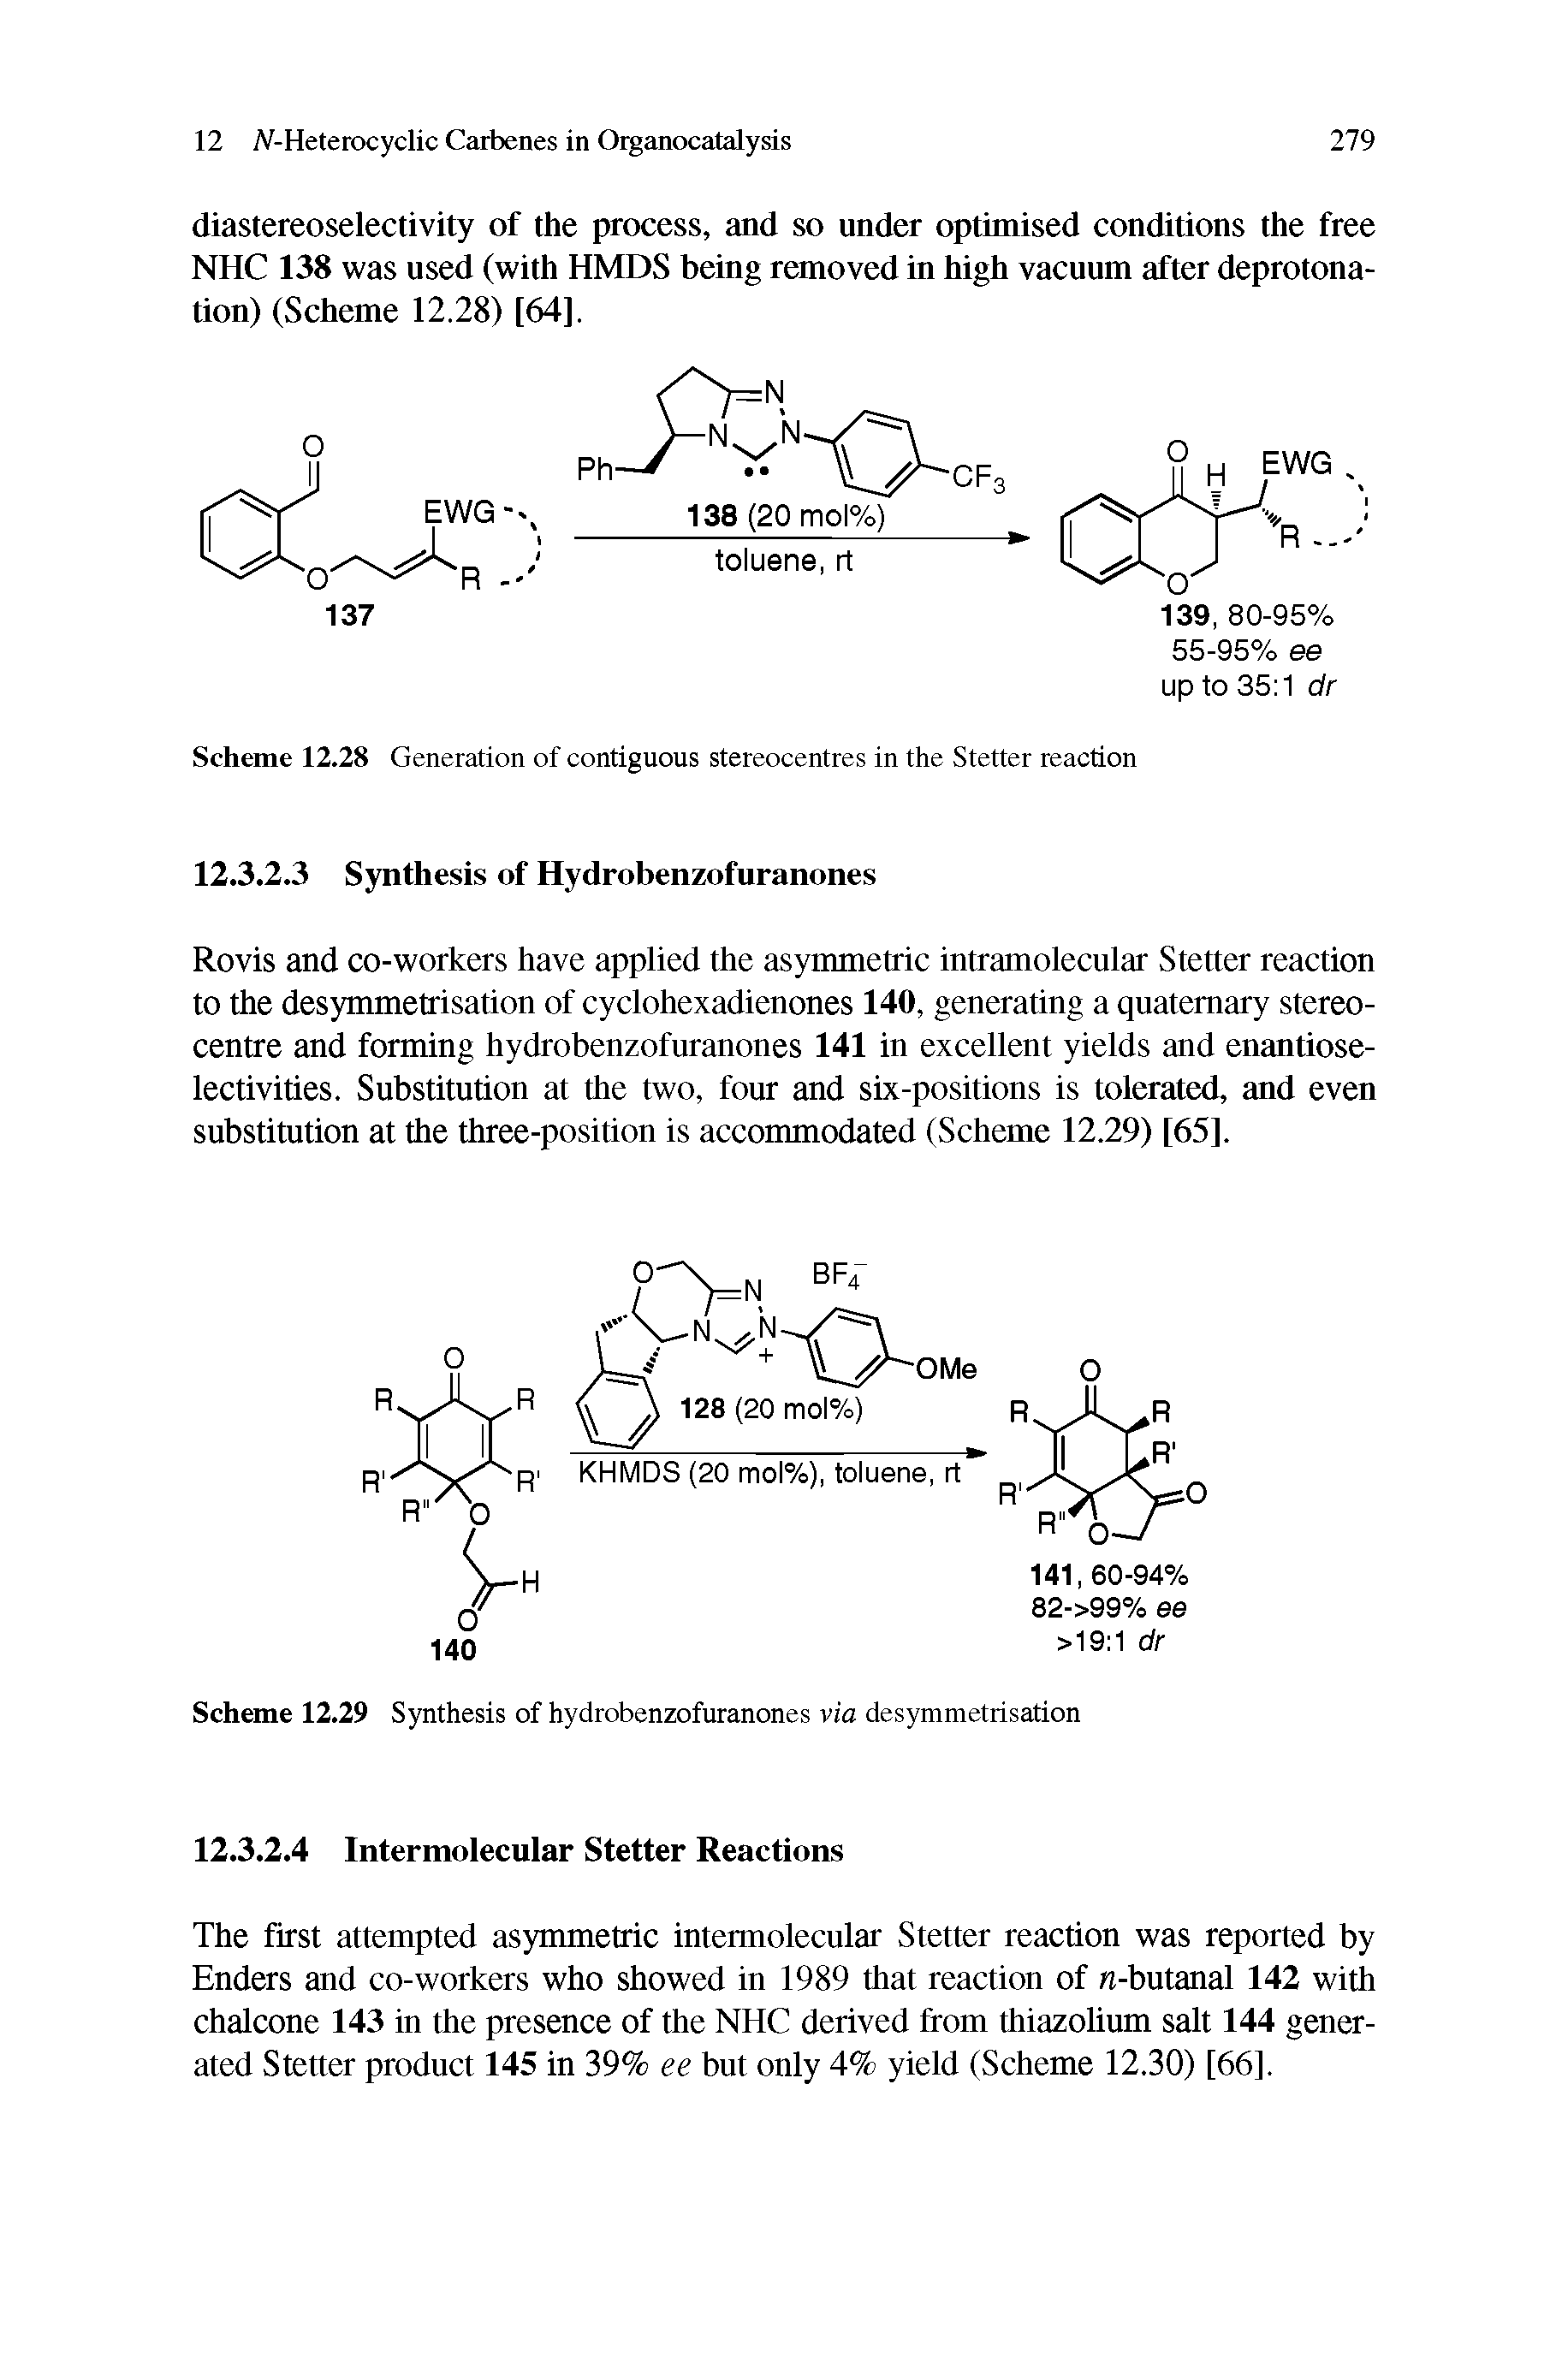 Scheme 12.28 Generation of contiguous stereocentres in the Stetter reaction...